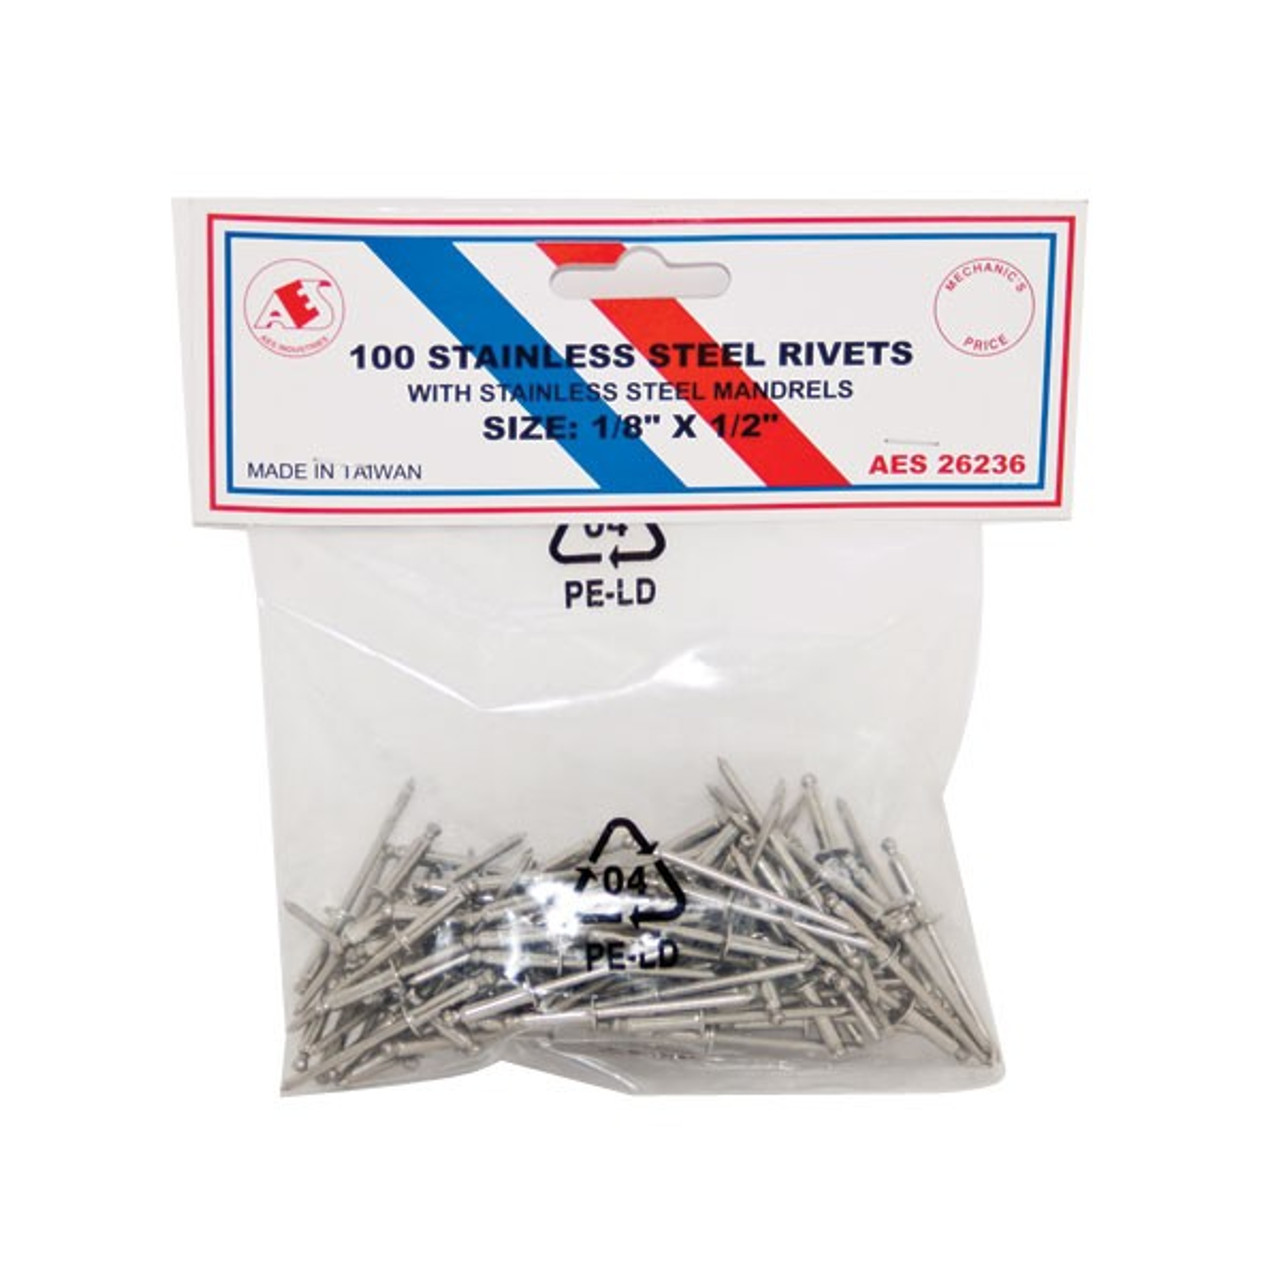 Stainless Steel Rivets - 1/8" x 1/2" - 100PC 26236